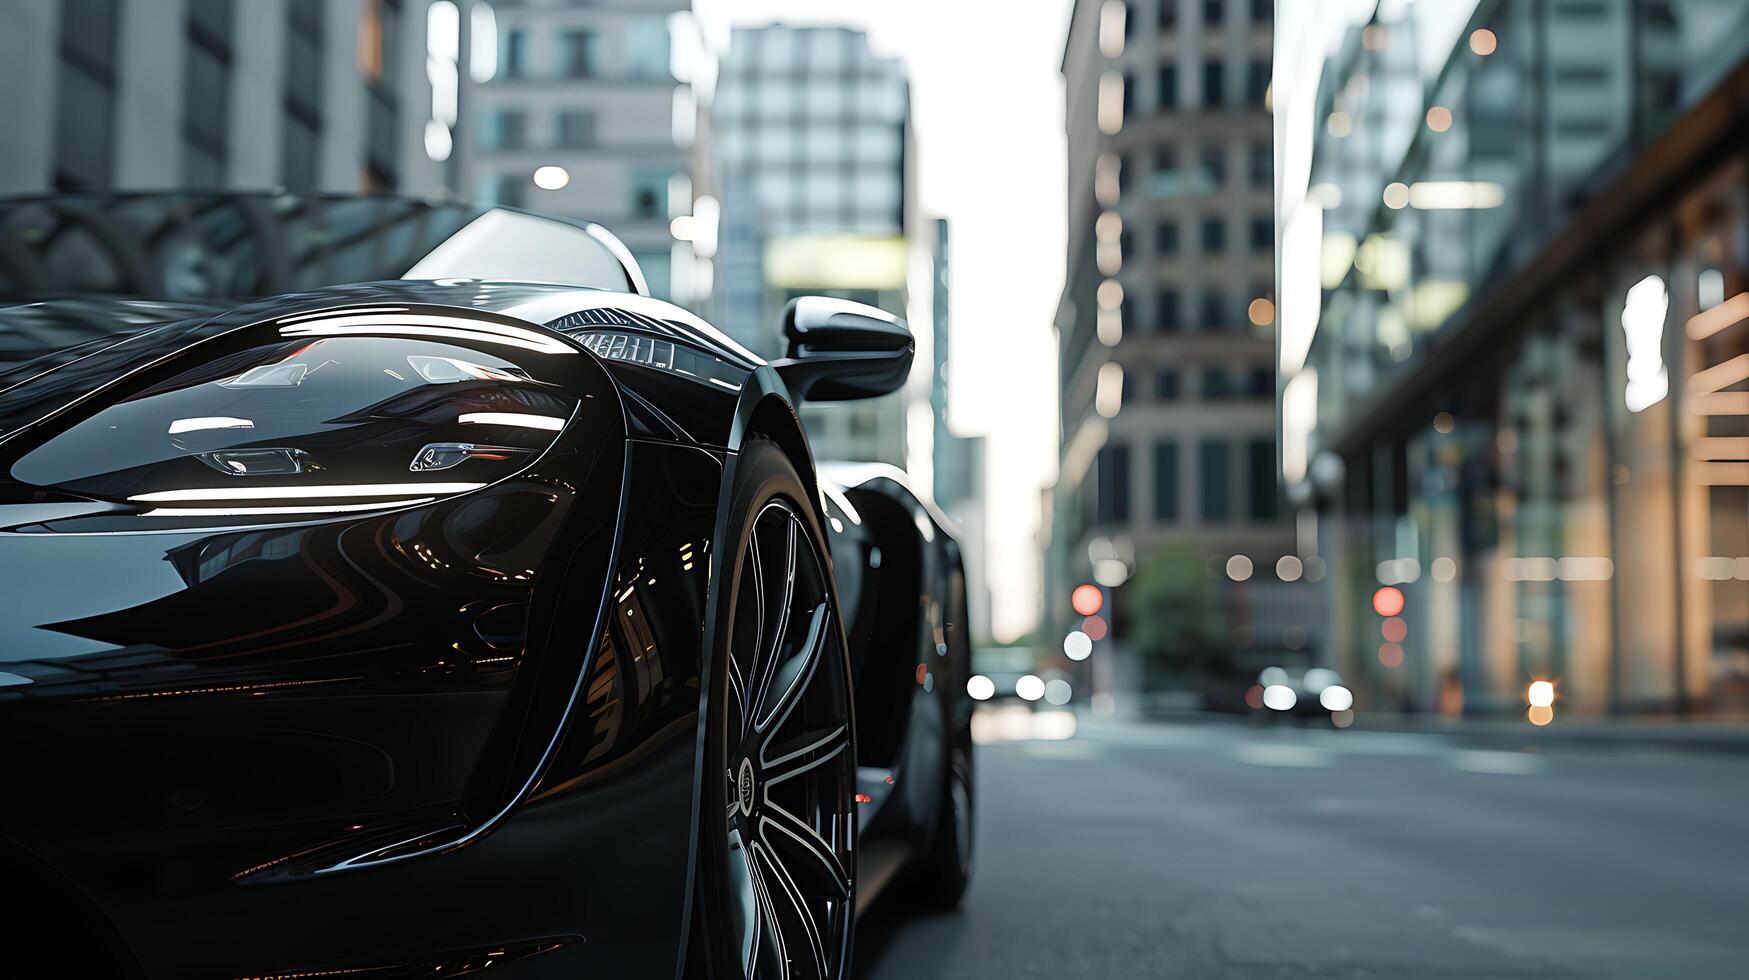 AI generated Front View of Sleek Black Sports Car Parked in Urban Setting with City Skyline photo